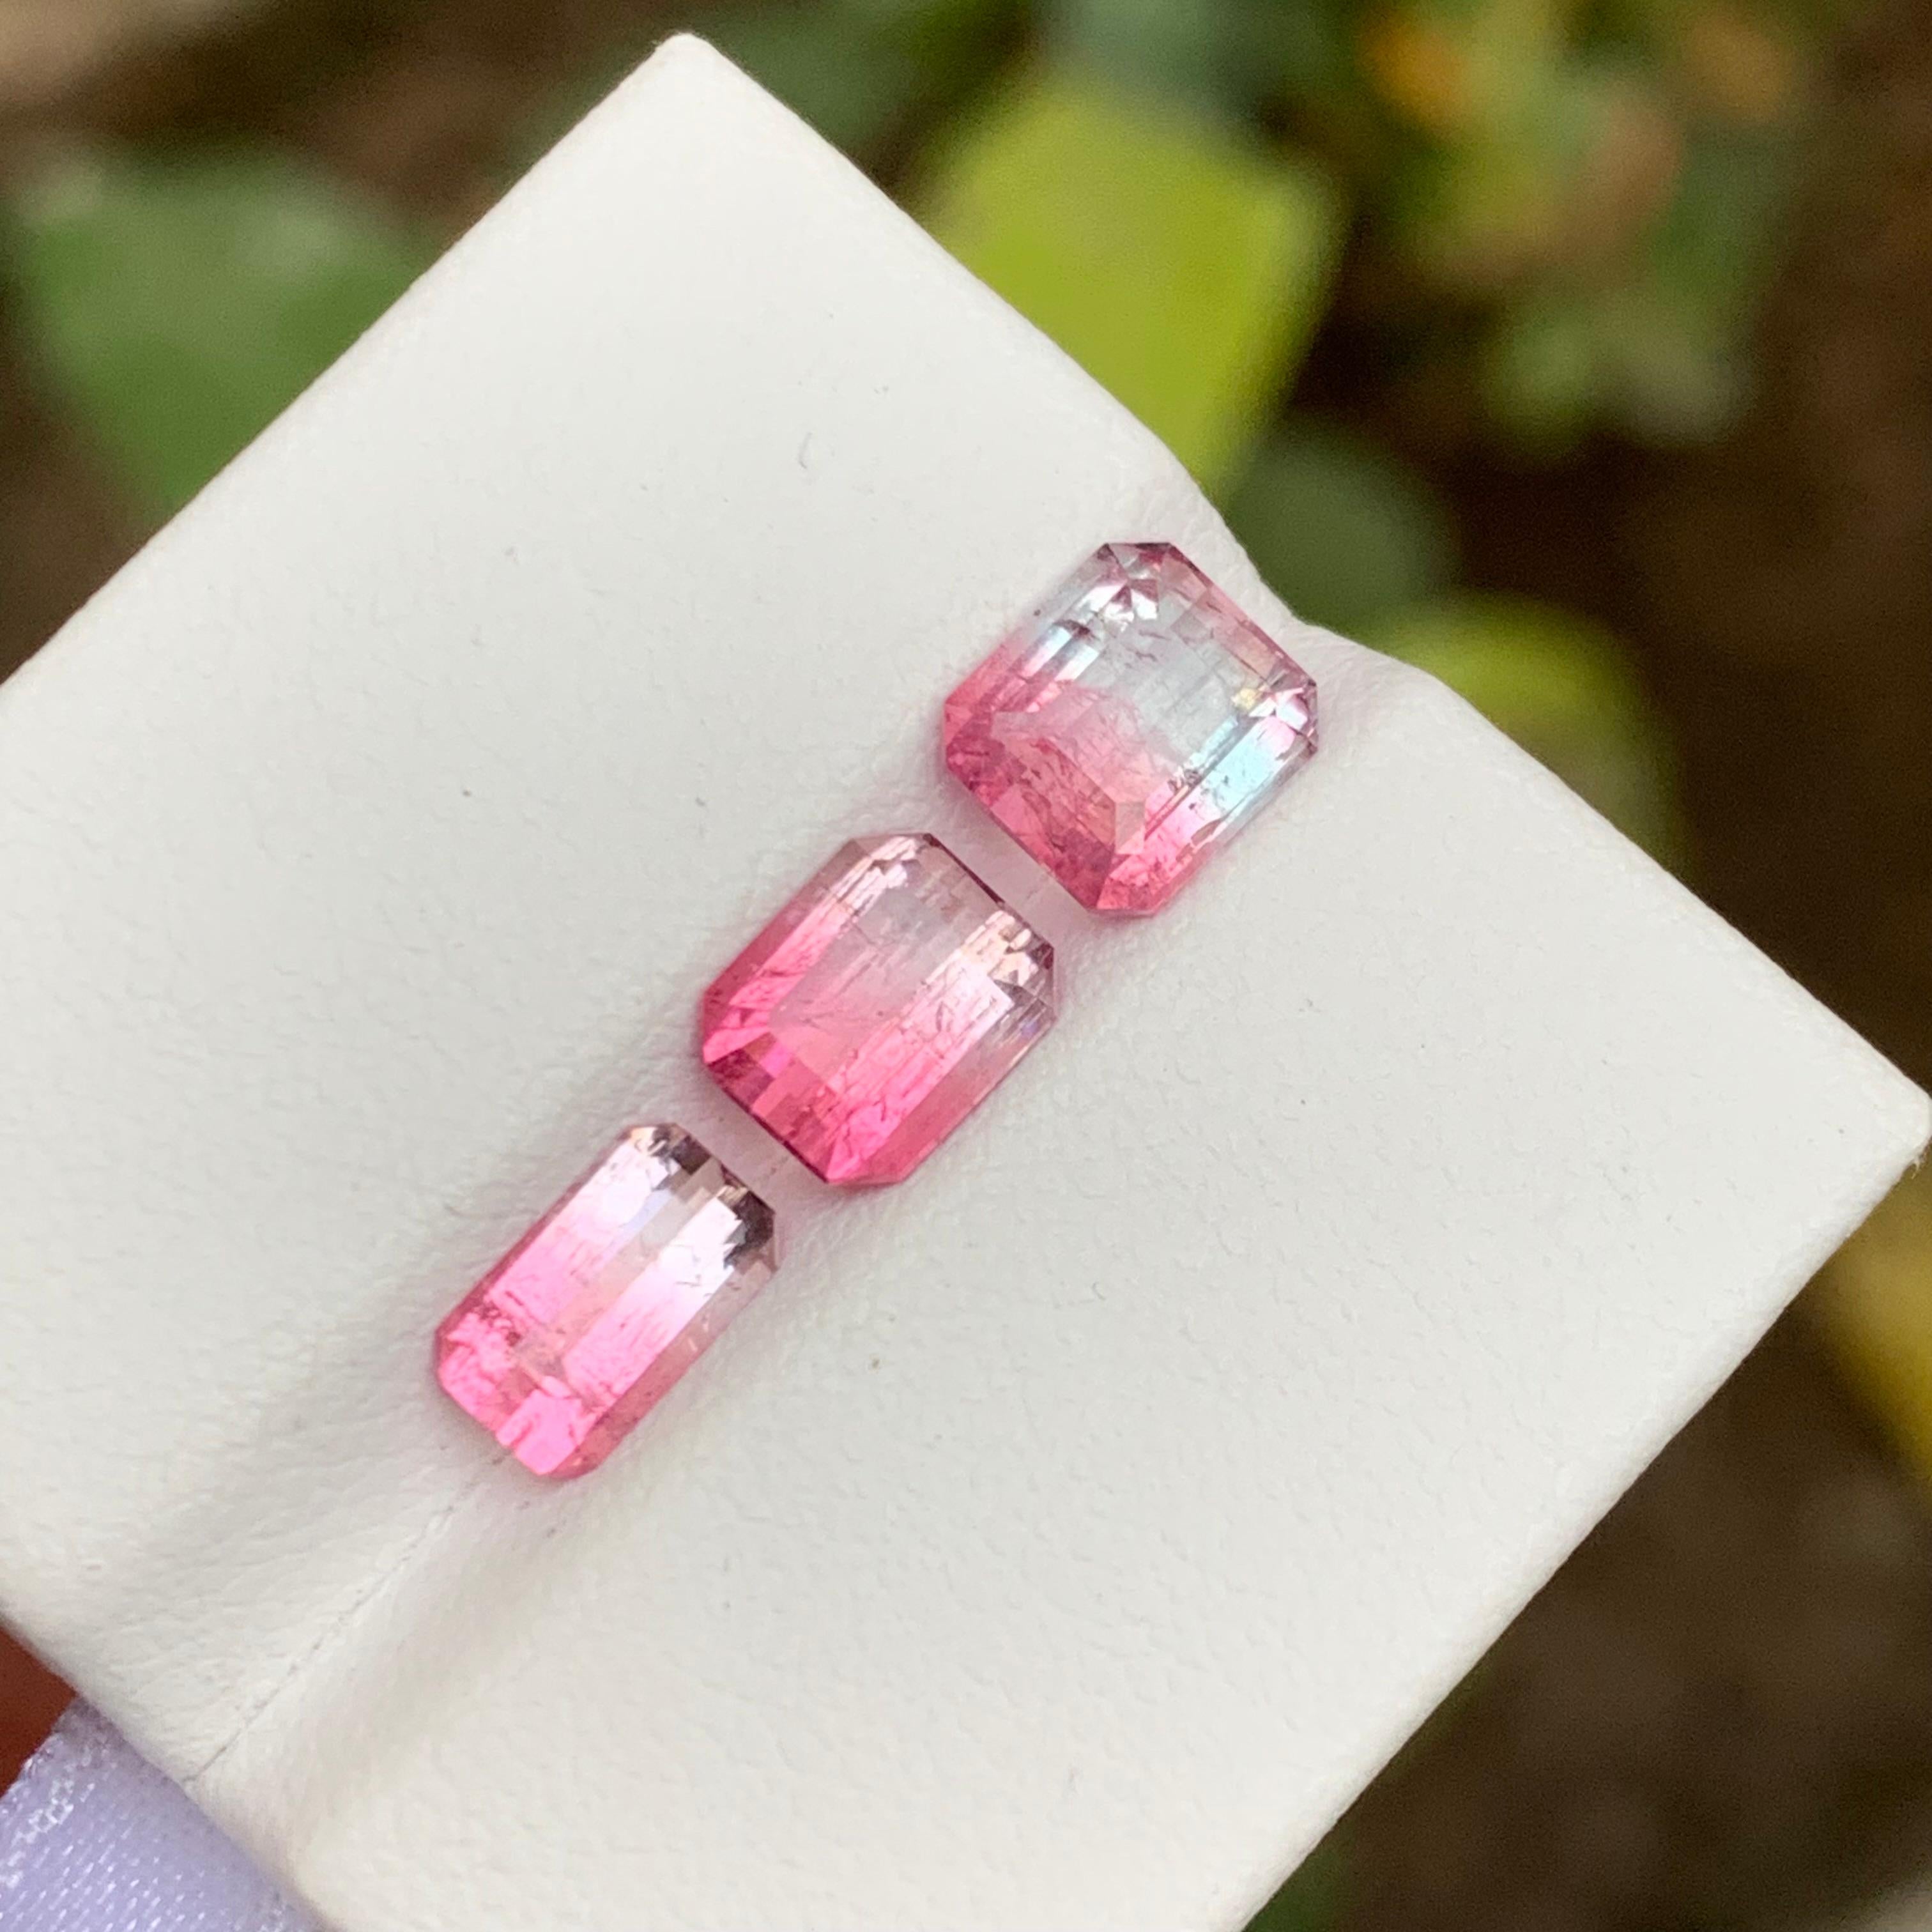 Gemstone Type: Tourmaline
Weight: 3.70 Carats
Dimensions: 
1.55 Ct: 6.90 x 6.30 x 4.07
1.40 Ct: 6.95 x 5.77 x 4.17
0.75 Ct: 7.26 x 4.34 x 2.93
Color: Pink Bicolor
Clarity: Slightly Include 
Treatment: Heated
Origin: Afghanistan 🇦🇫 
Certificate: On